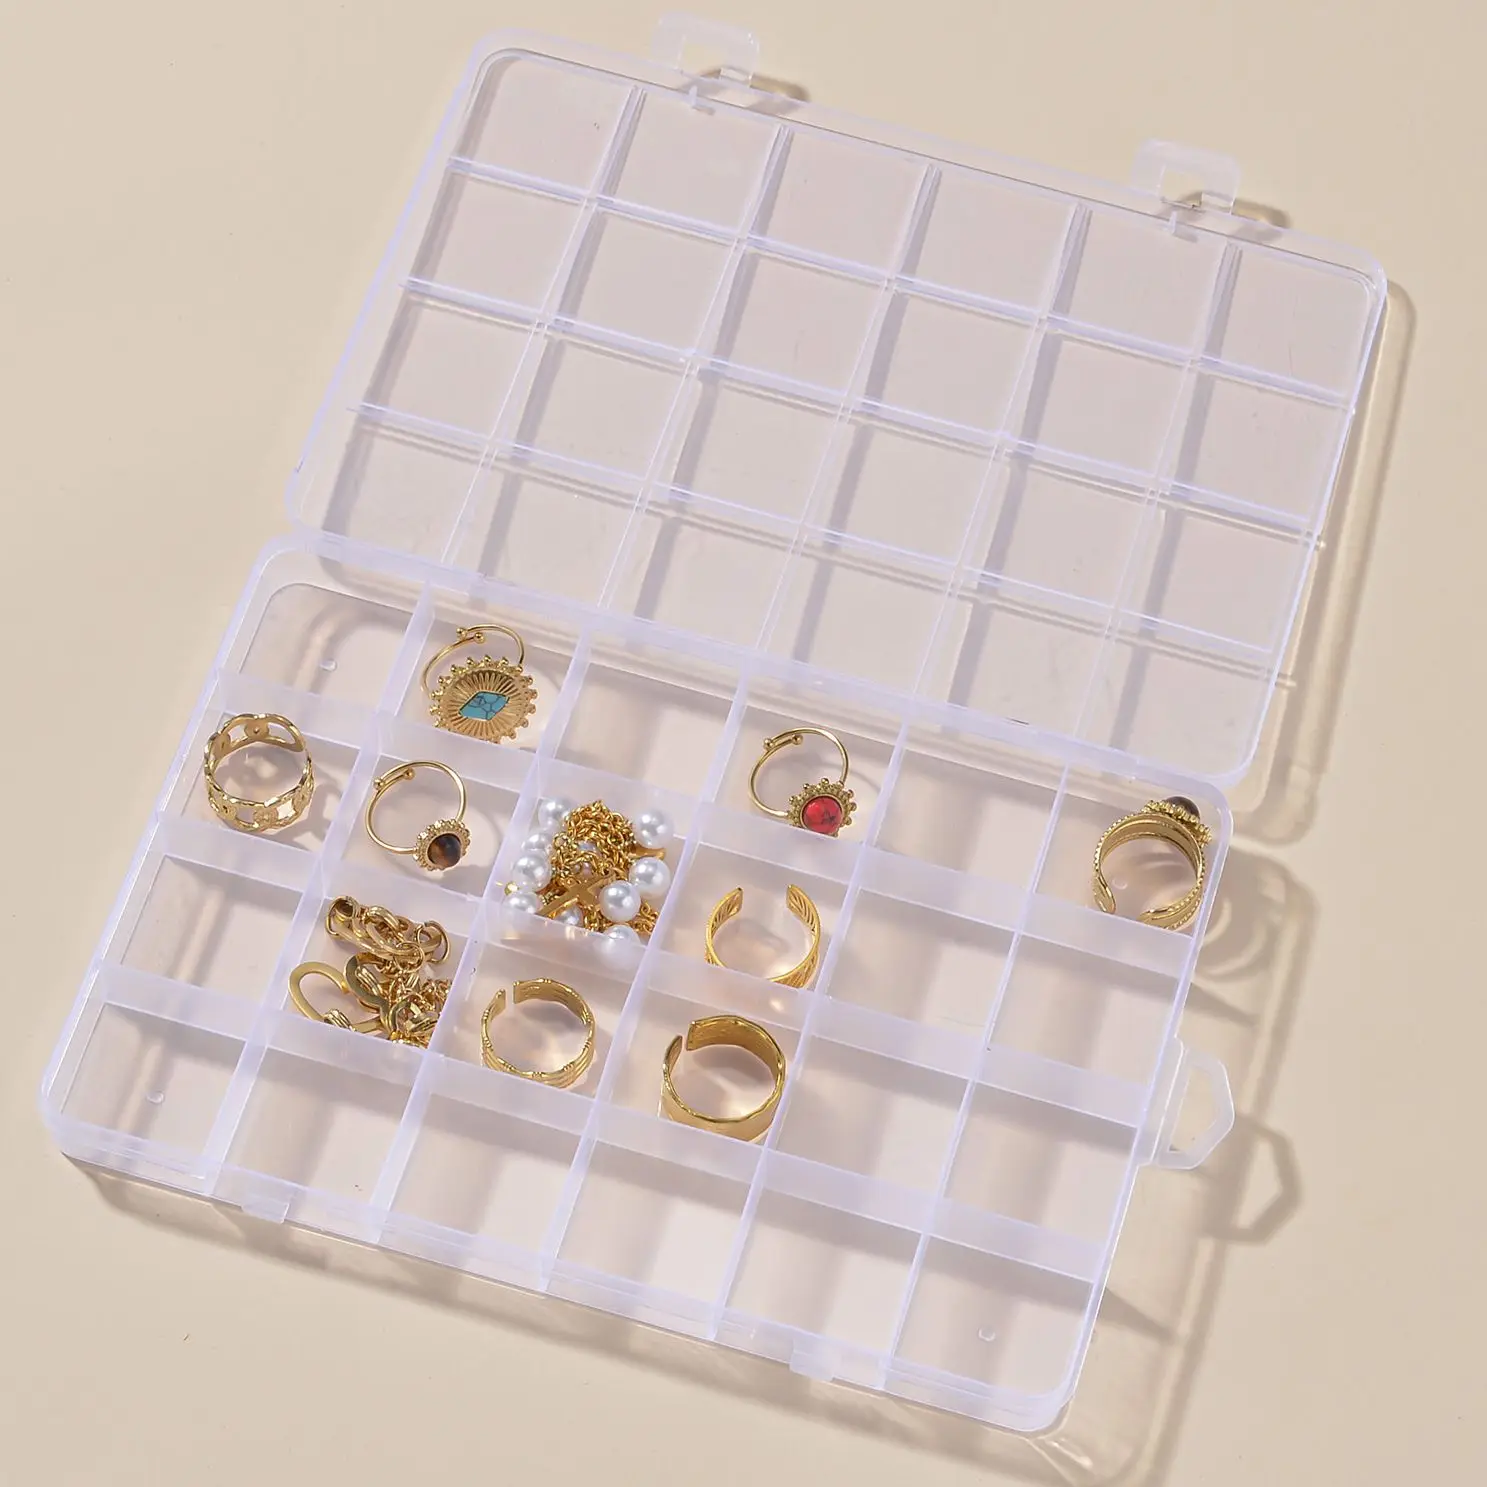 

24 Grids Portable Transparent Storage Box Plastic Clear Organizer with Cover Box for Jewelry Earrings Screw Nails Parts